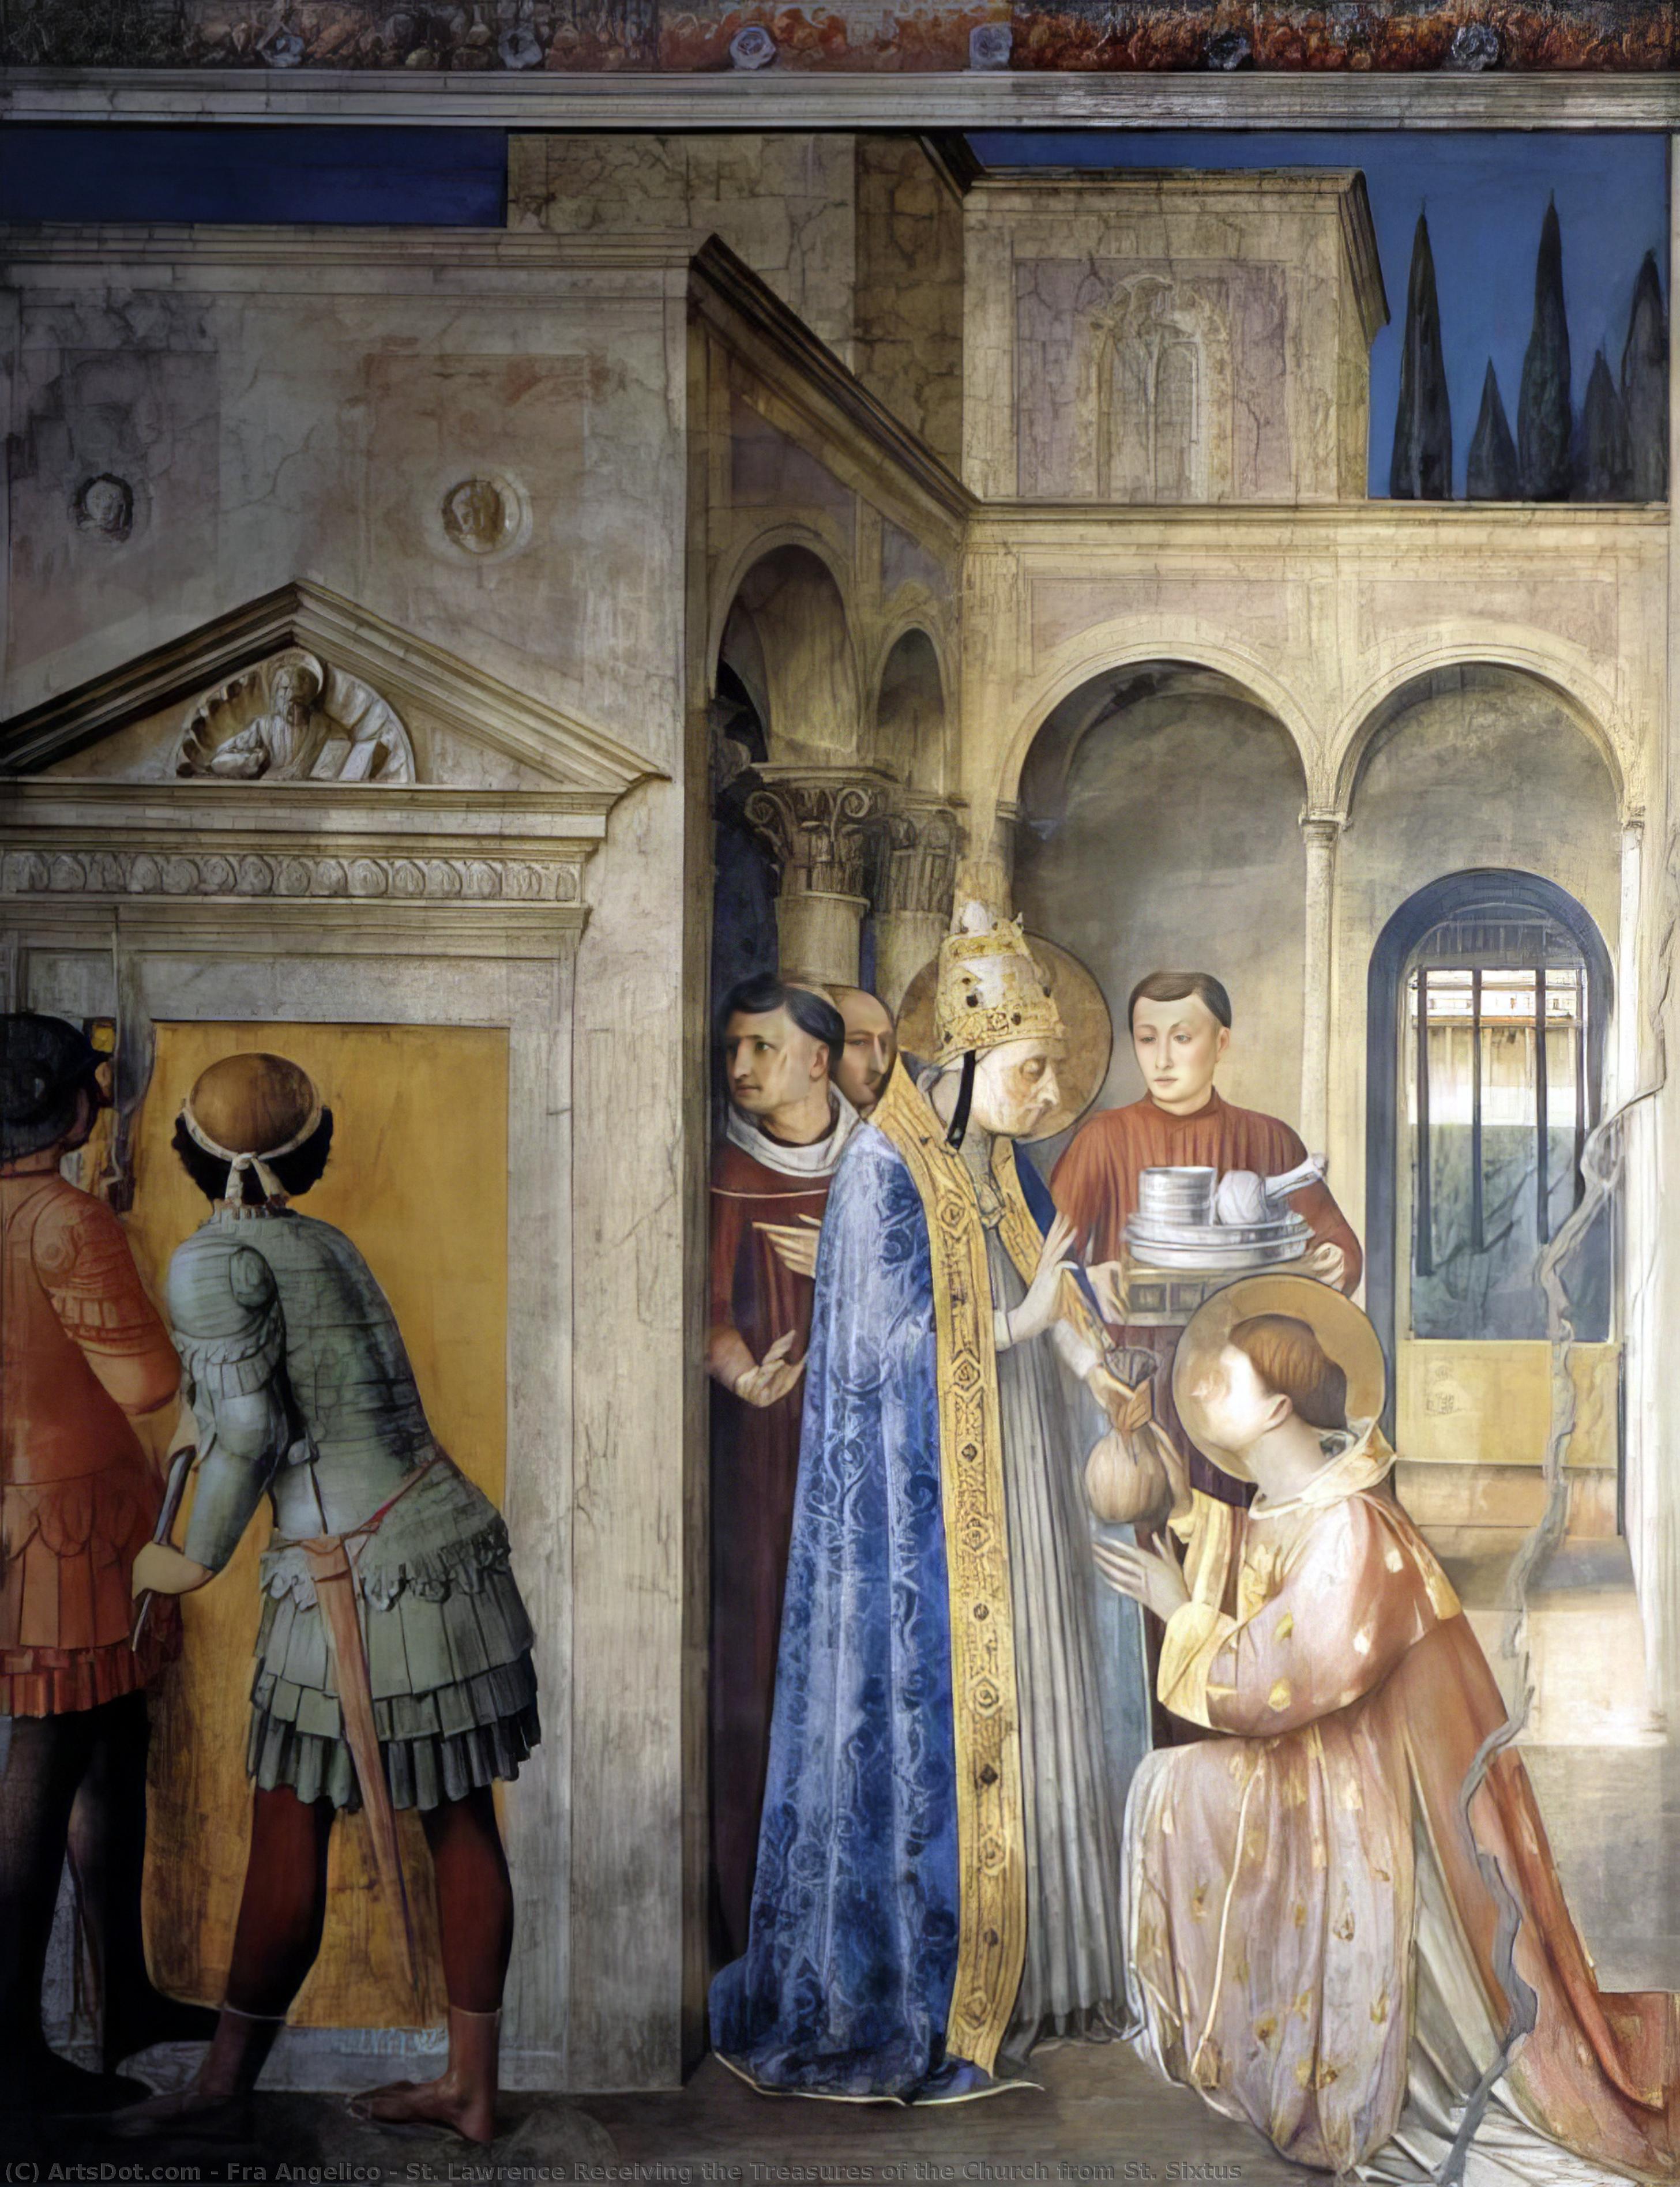 WikiOO.org - 백과 사전 - 회화, 삽화 Fra Angelico - St. Lawrence Receiving the Treasures of the Church from St. Sixtus